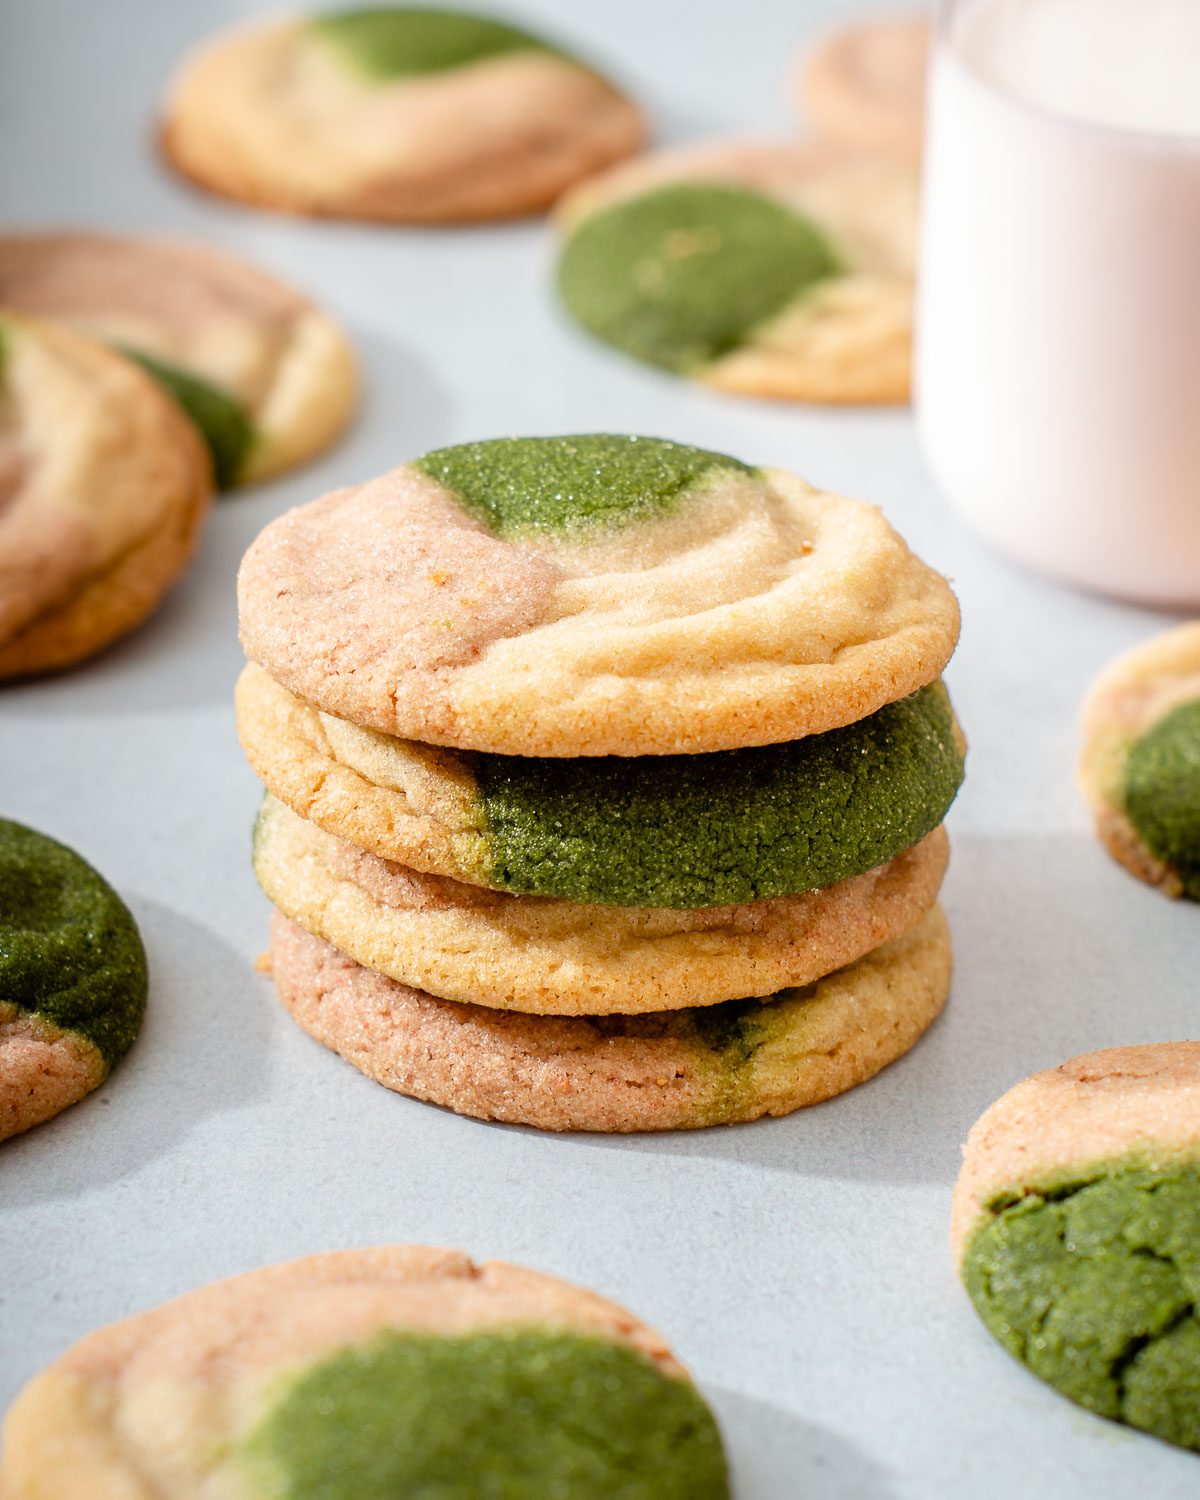 A stack of strawberry matcha neapolitan cookies with a glass of milk nearby.